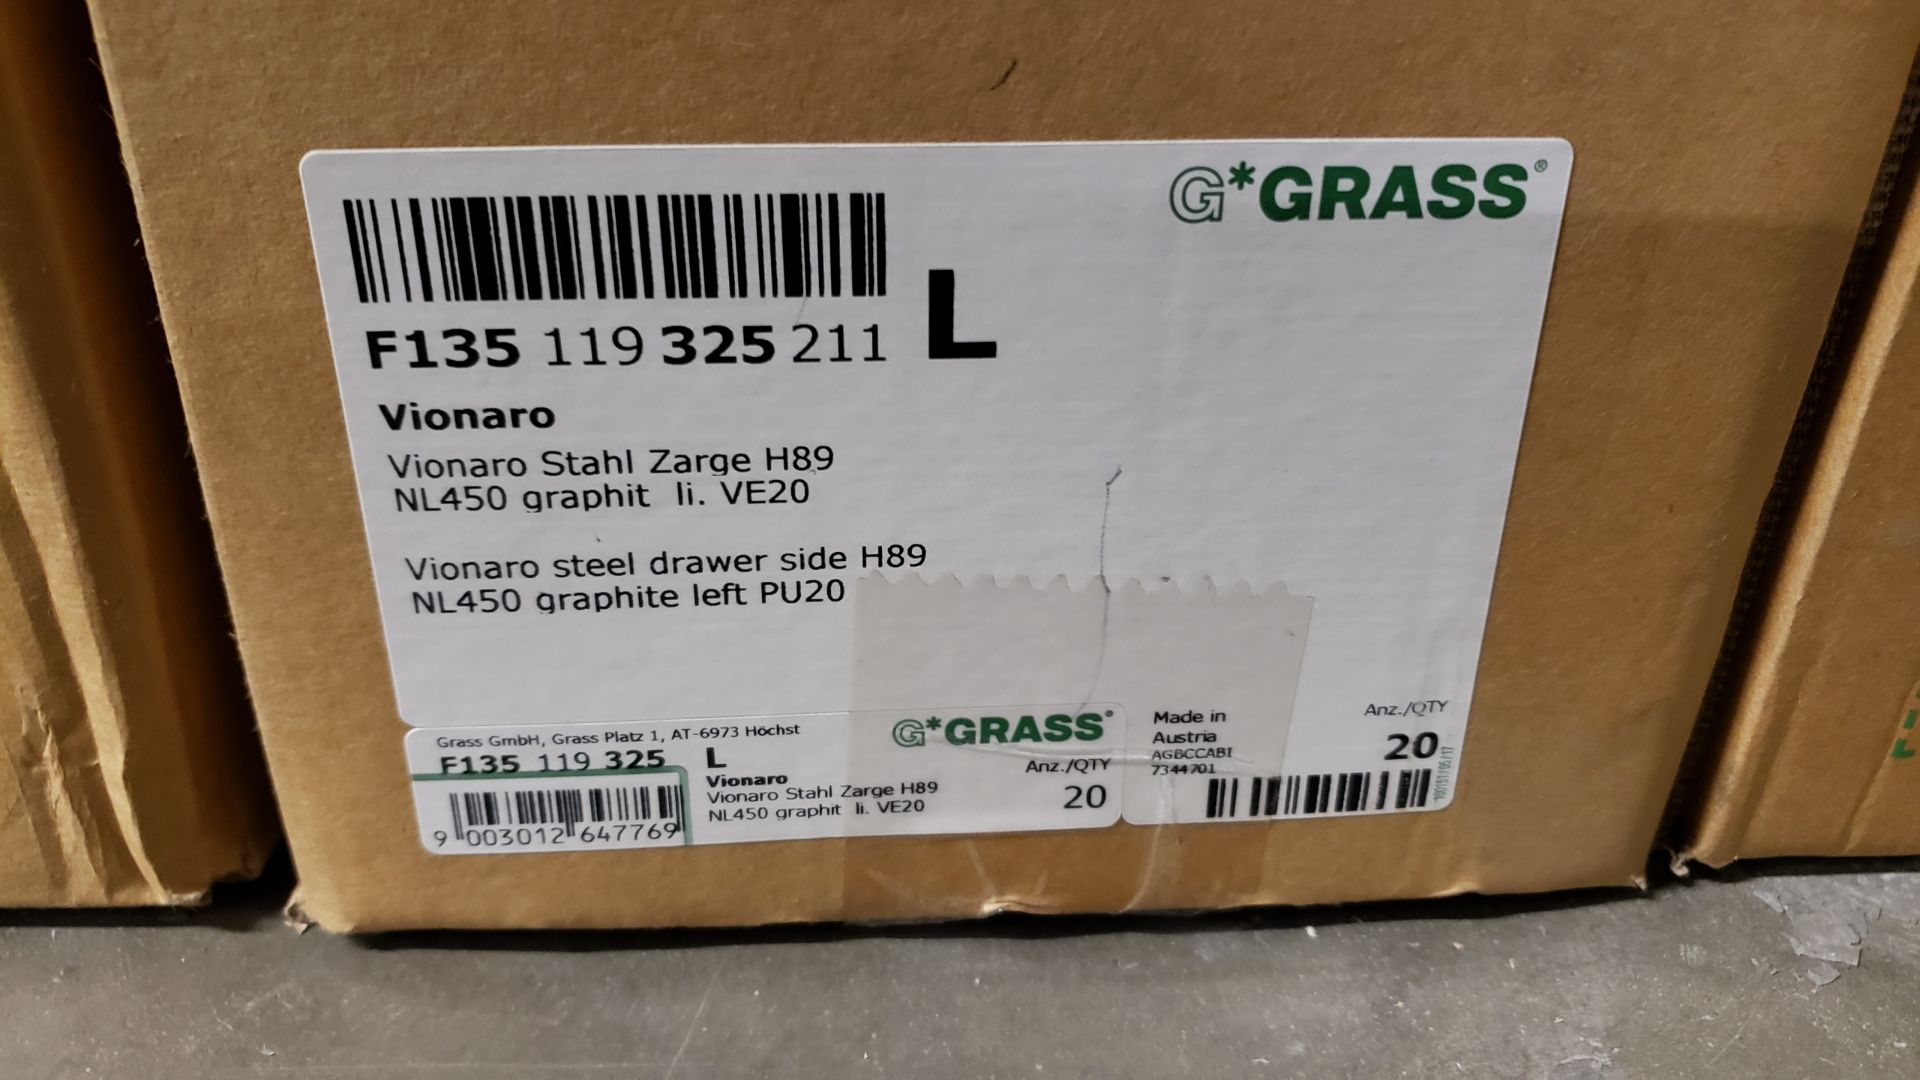 LOT BOXES OF GRASS VIONARO STEEL DRAWER SIDE H89 NL450, GRAPHITE, RIGHT AND LEFT PU20, 12 BOXES OF - Image 4 of 7